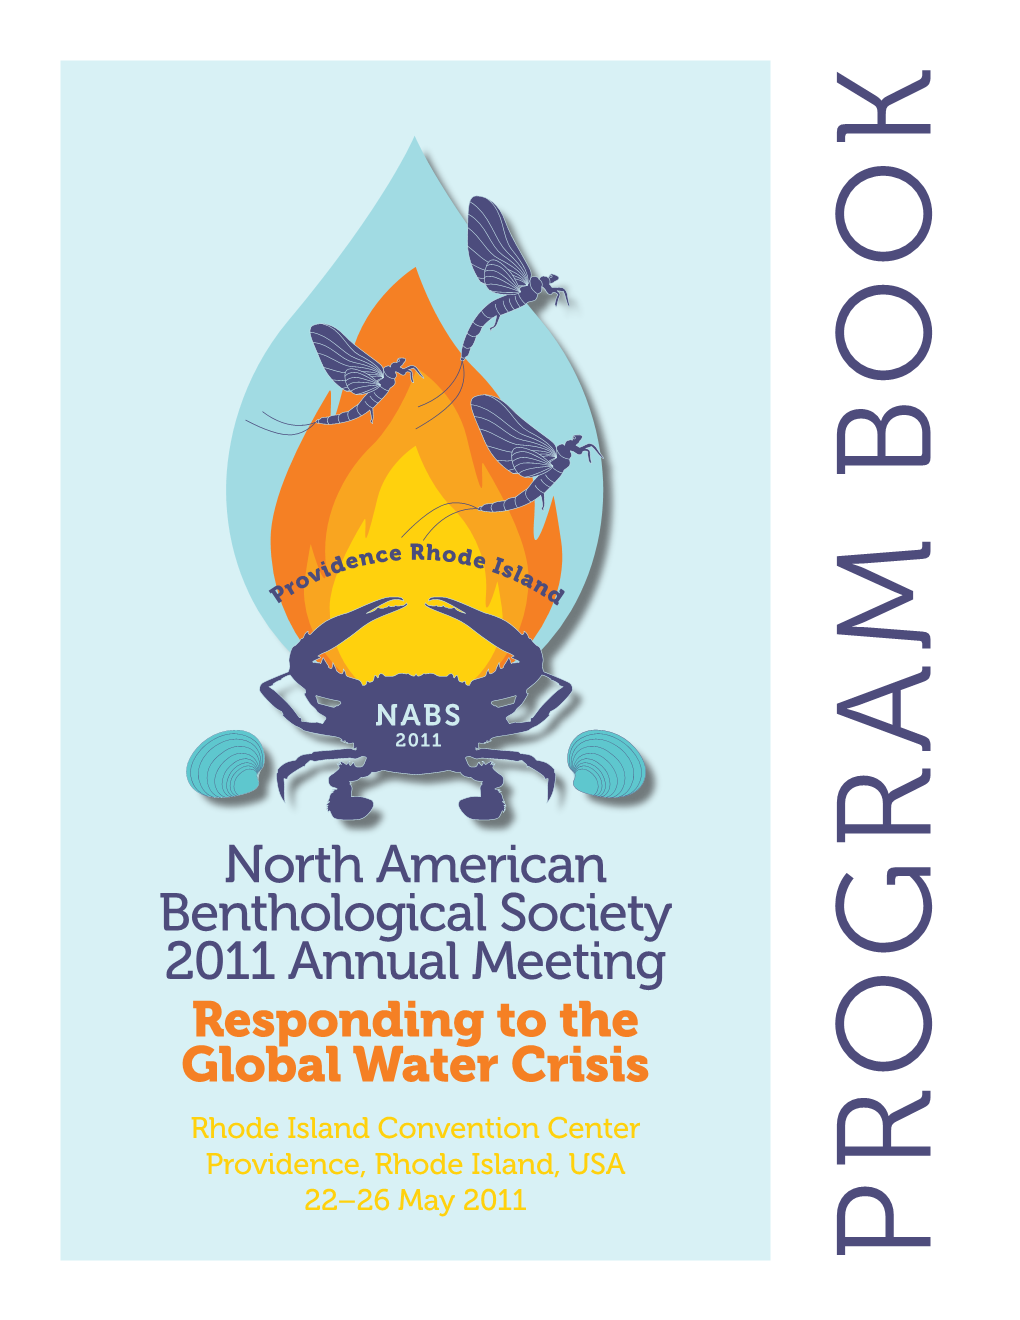 North American Benthological Society 2011 Annual Meeting